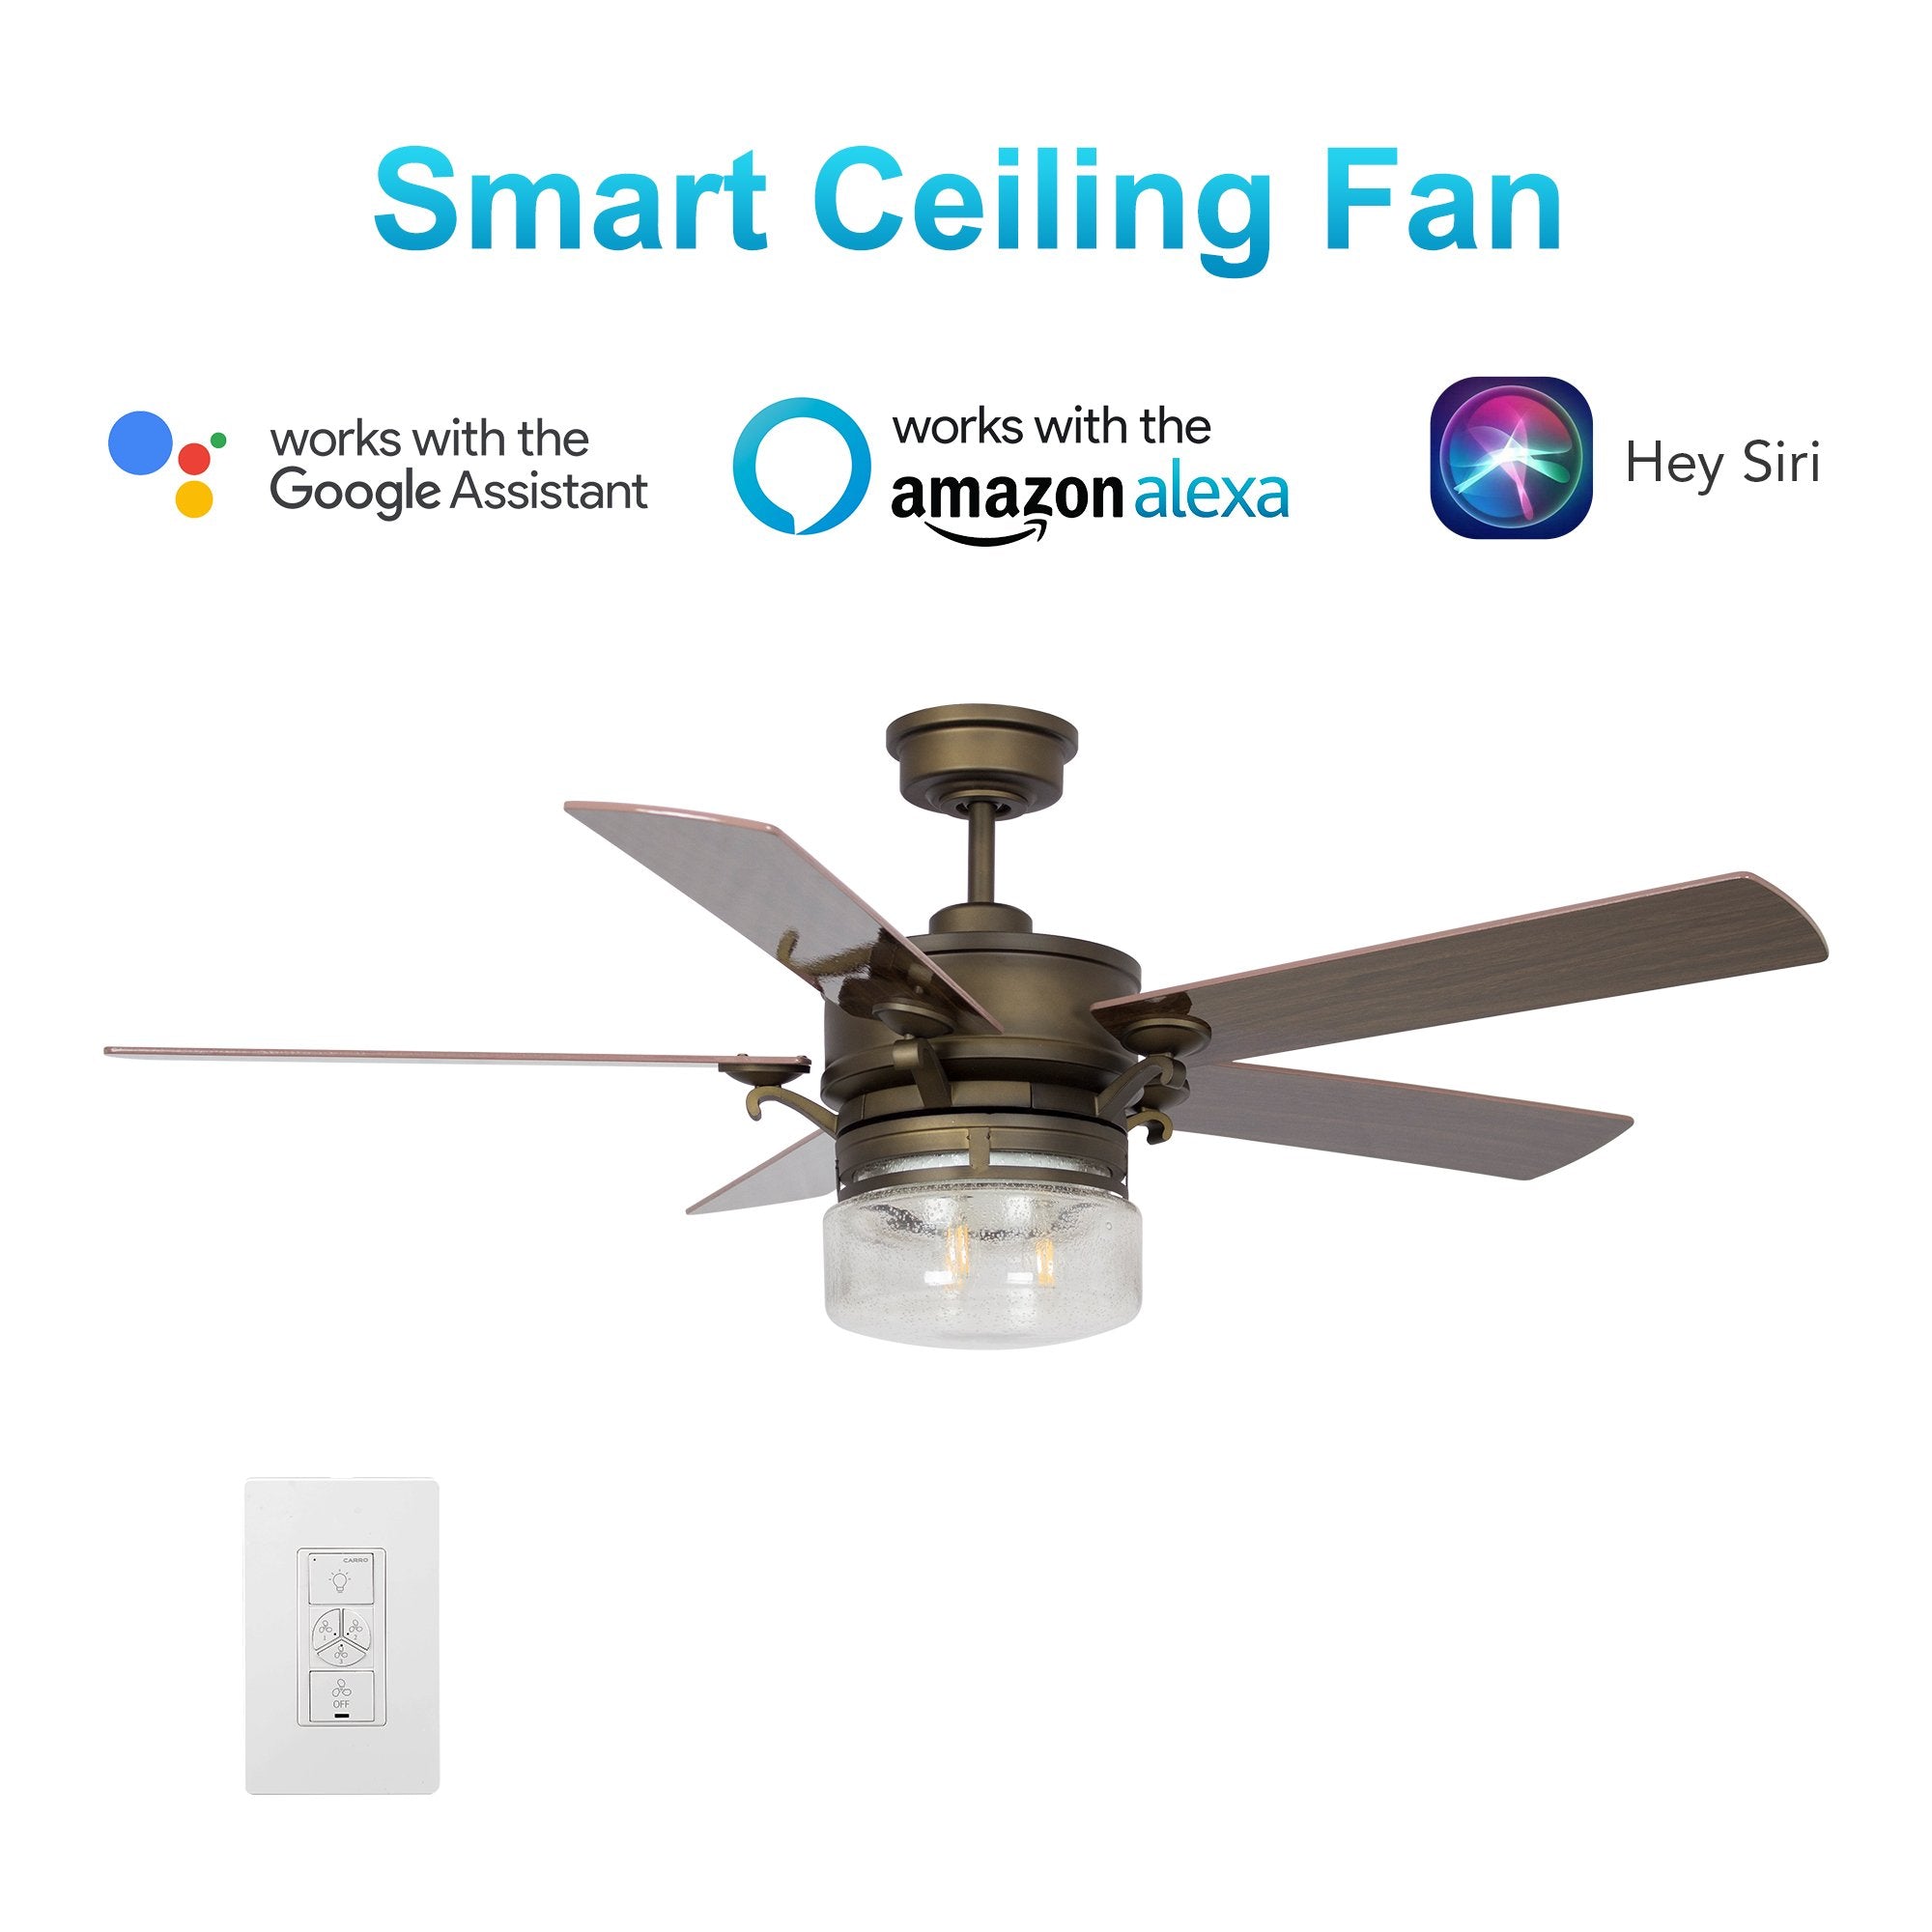 Alexandria 52" In. Oil Rubbed Bronze/Brown Wood 5 Blade Smart Ceiling Fan with LED Light Kit Works with Wall control, Wi-Fi apps and Voice control via Google Assistant/Alexa/Siri